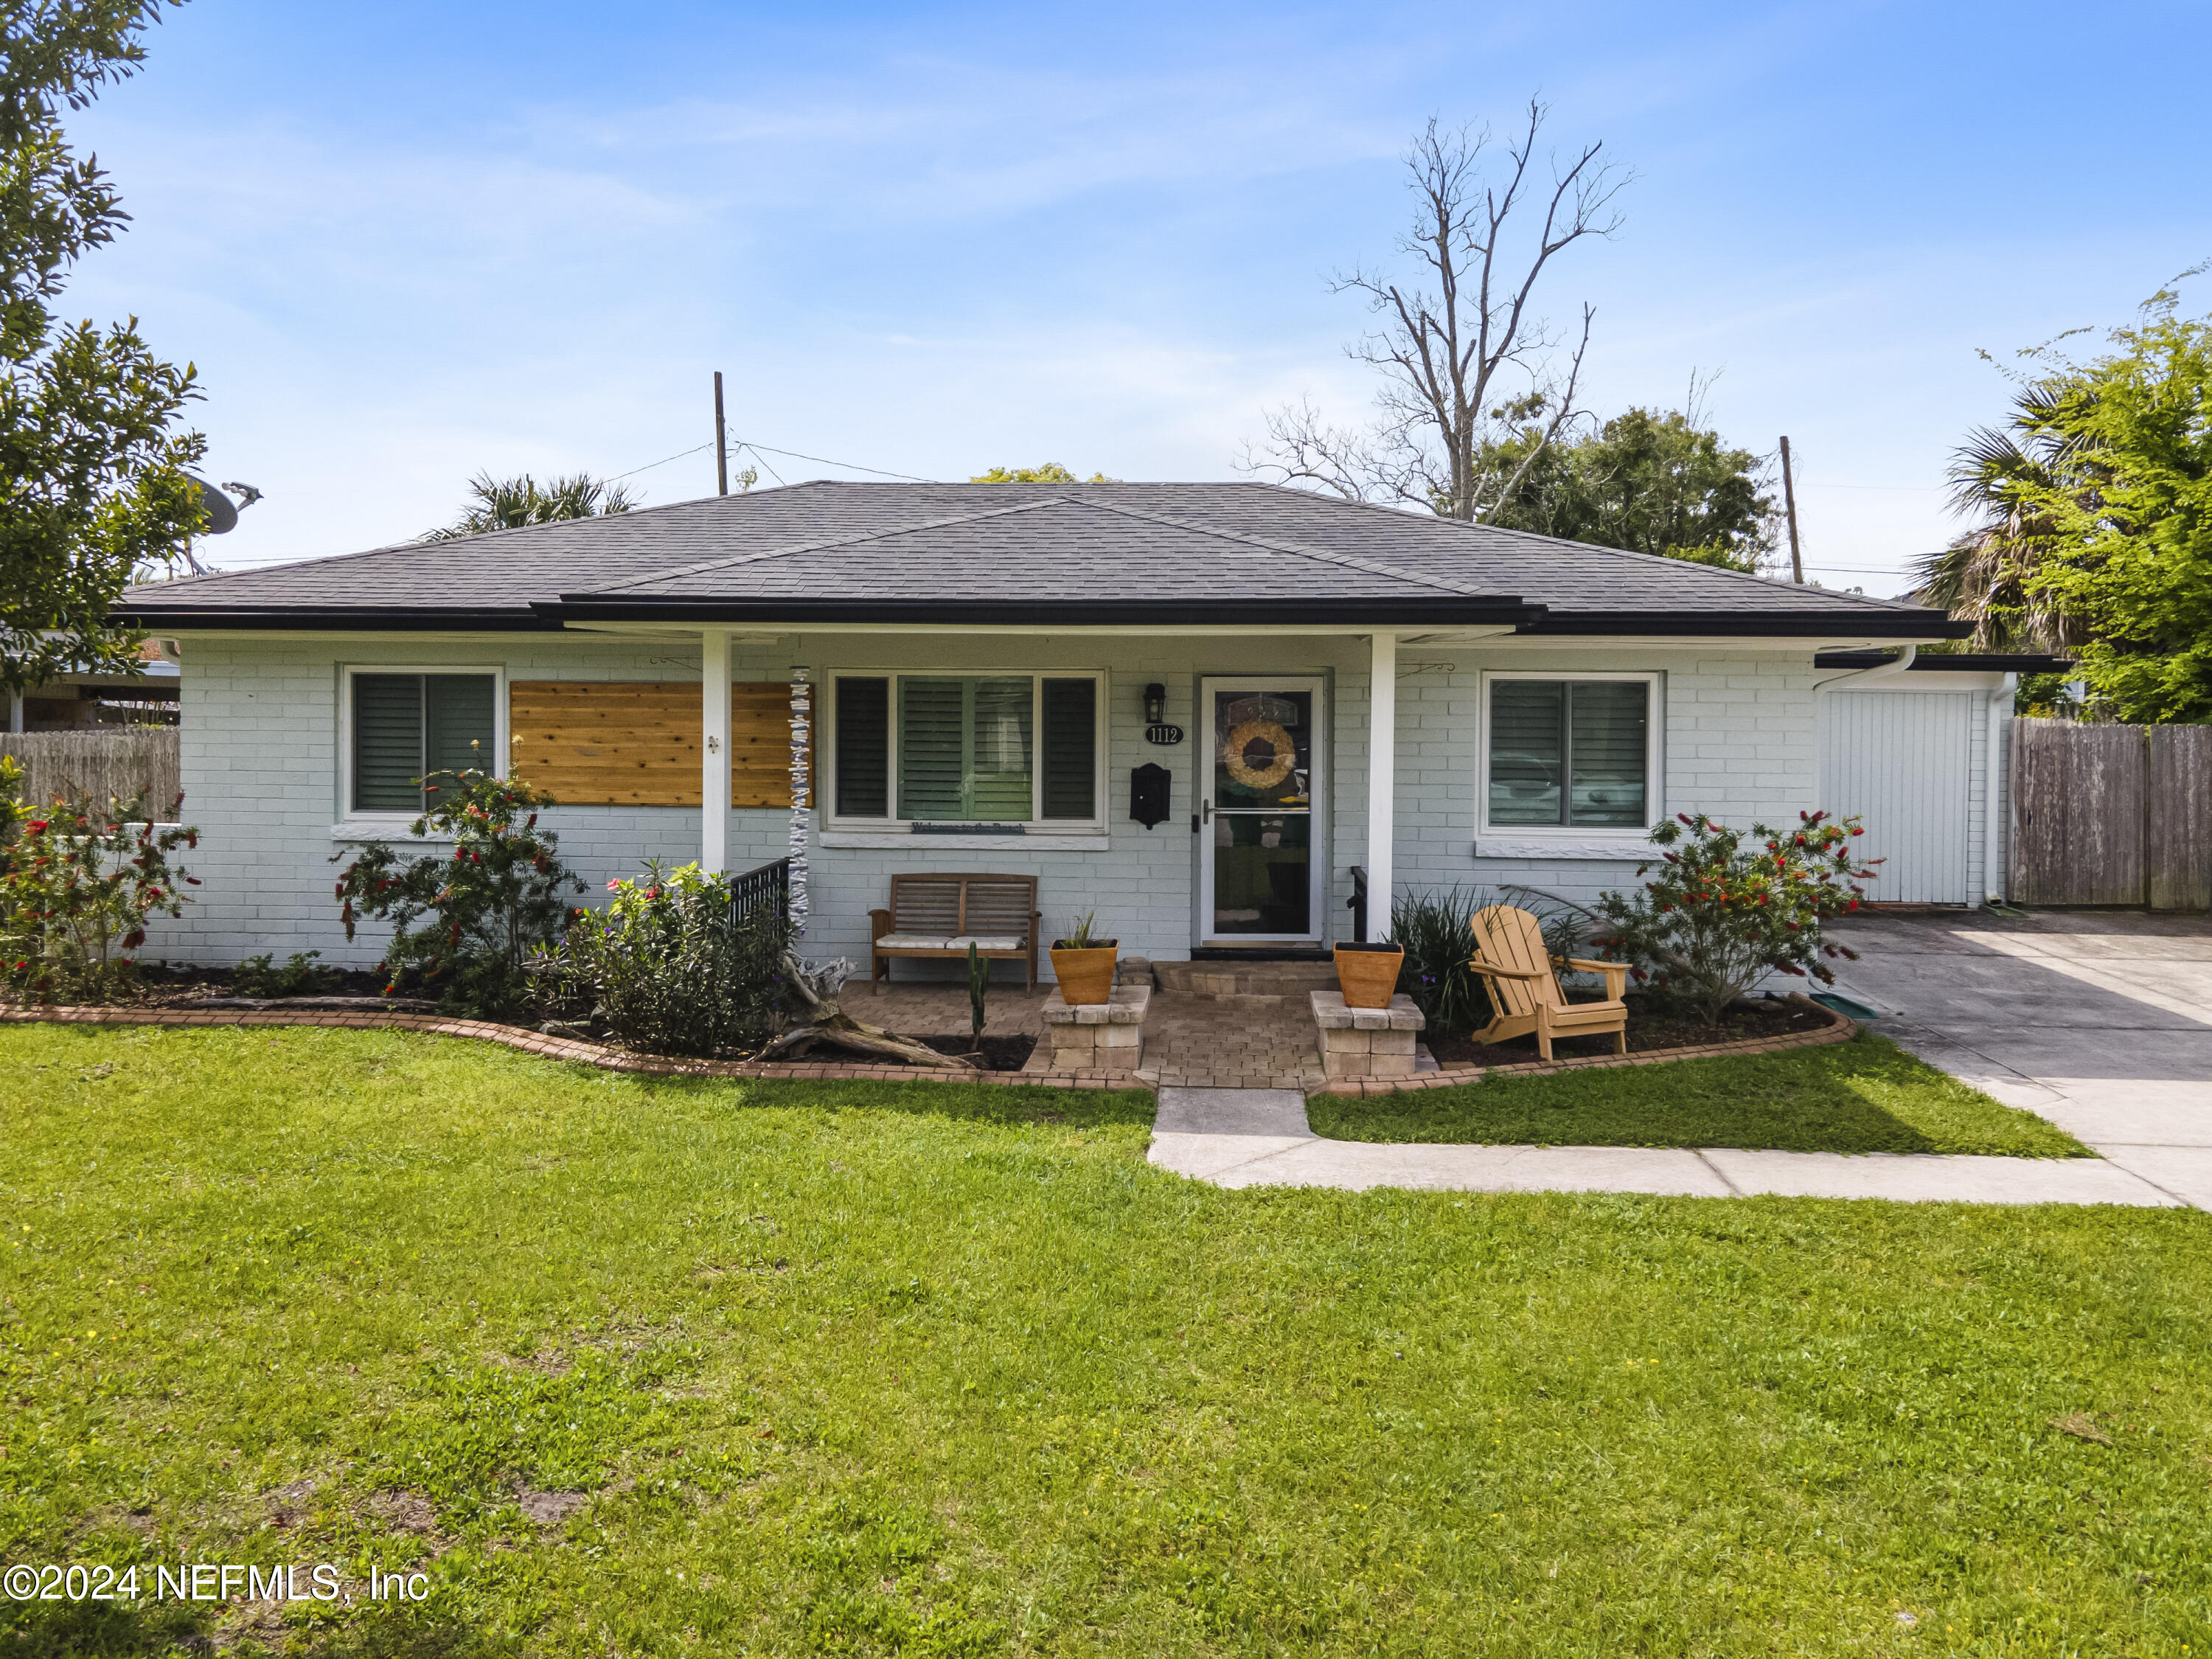 Jacksonville Beach, FL home for sale located at 1112 14th Avenue N, Jacksonville Beach, FL 32250